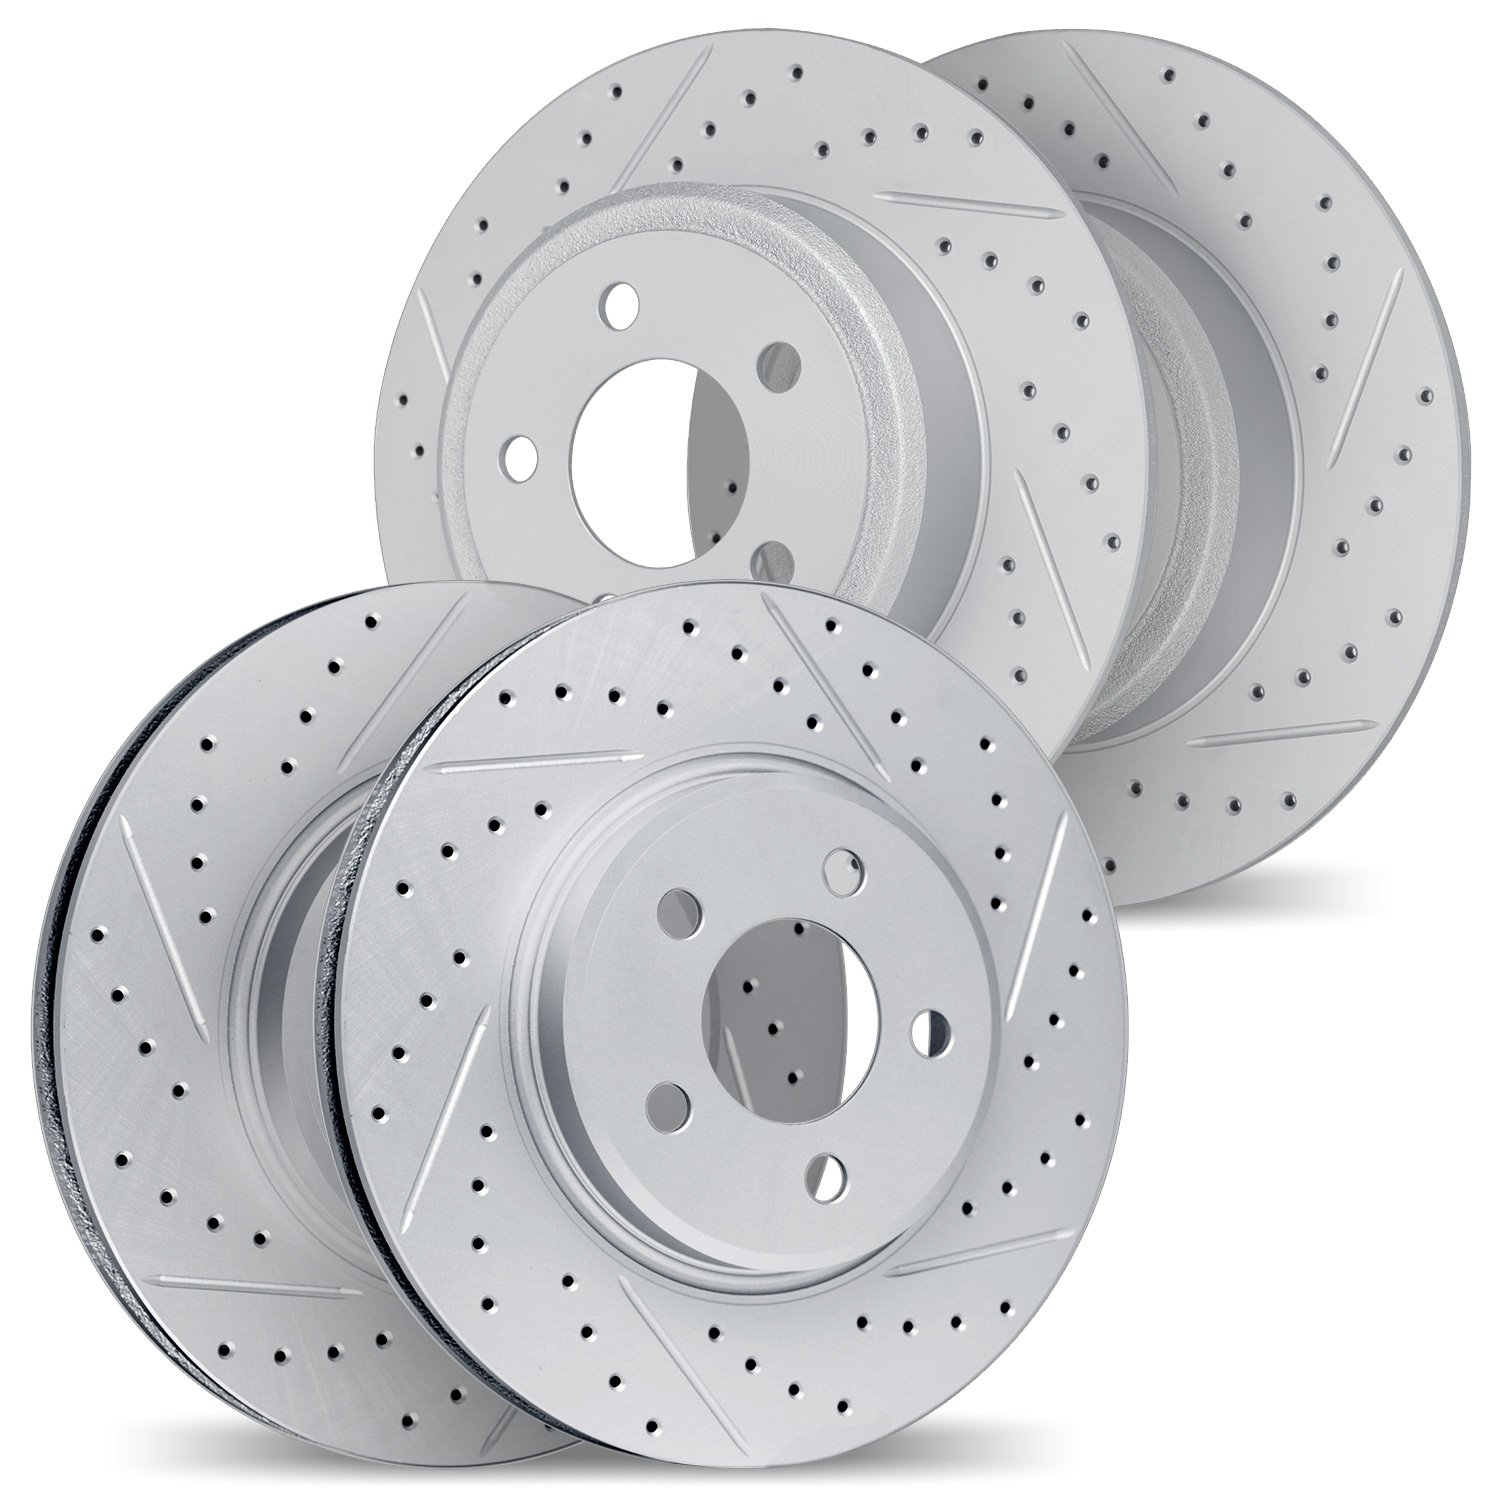 2004-59057 Geoperformance Drilled/Slotted Brake Rotors, 2012-2016 Acura/Honda, Position: Front and Rear